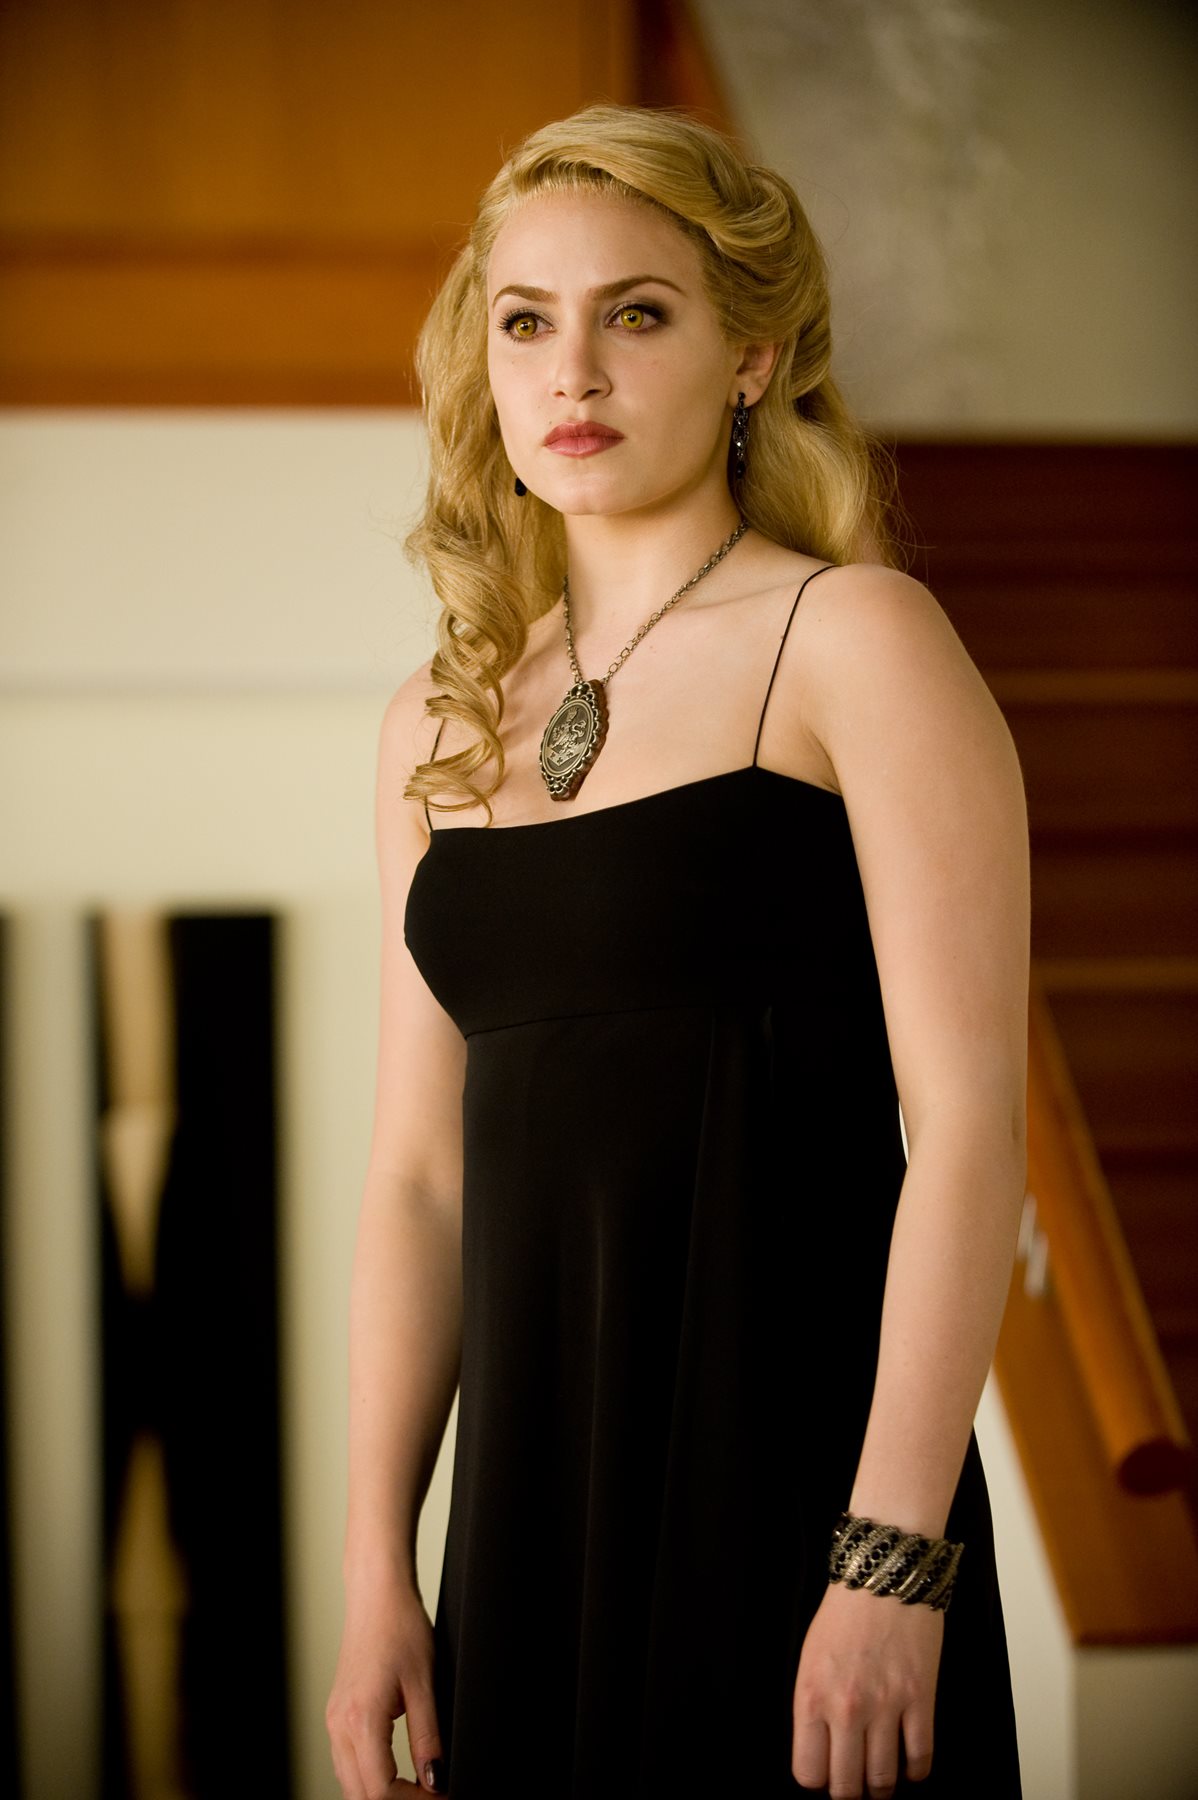 Rosalie Hale’s Party Costume - Current price: $475